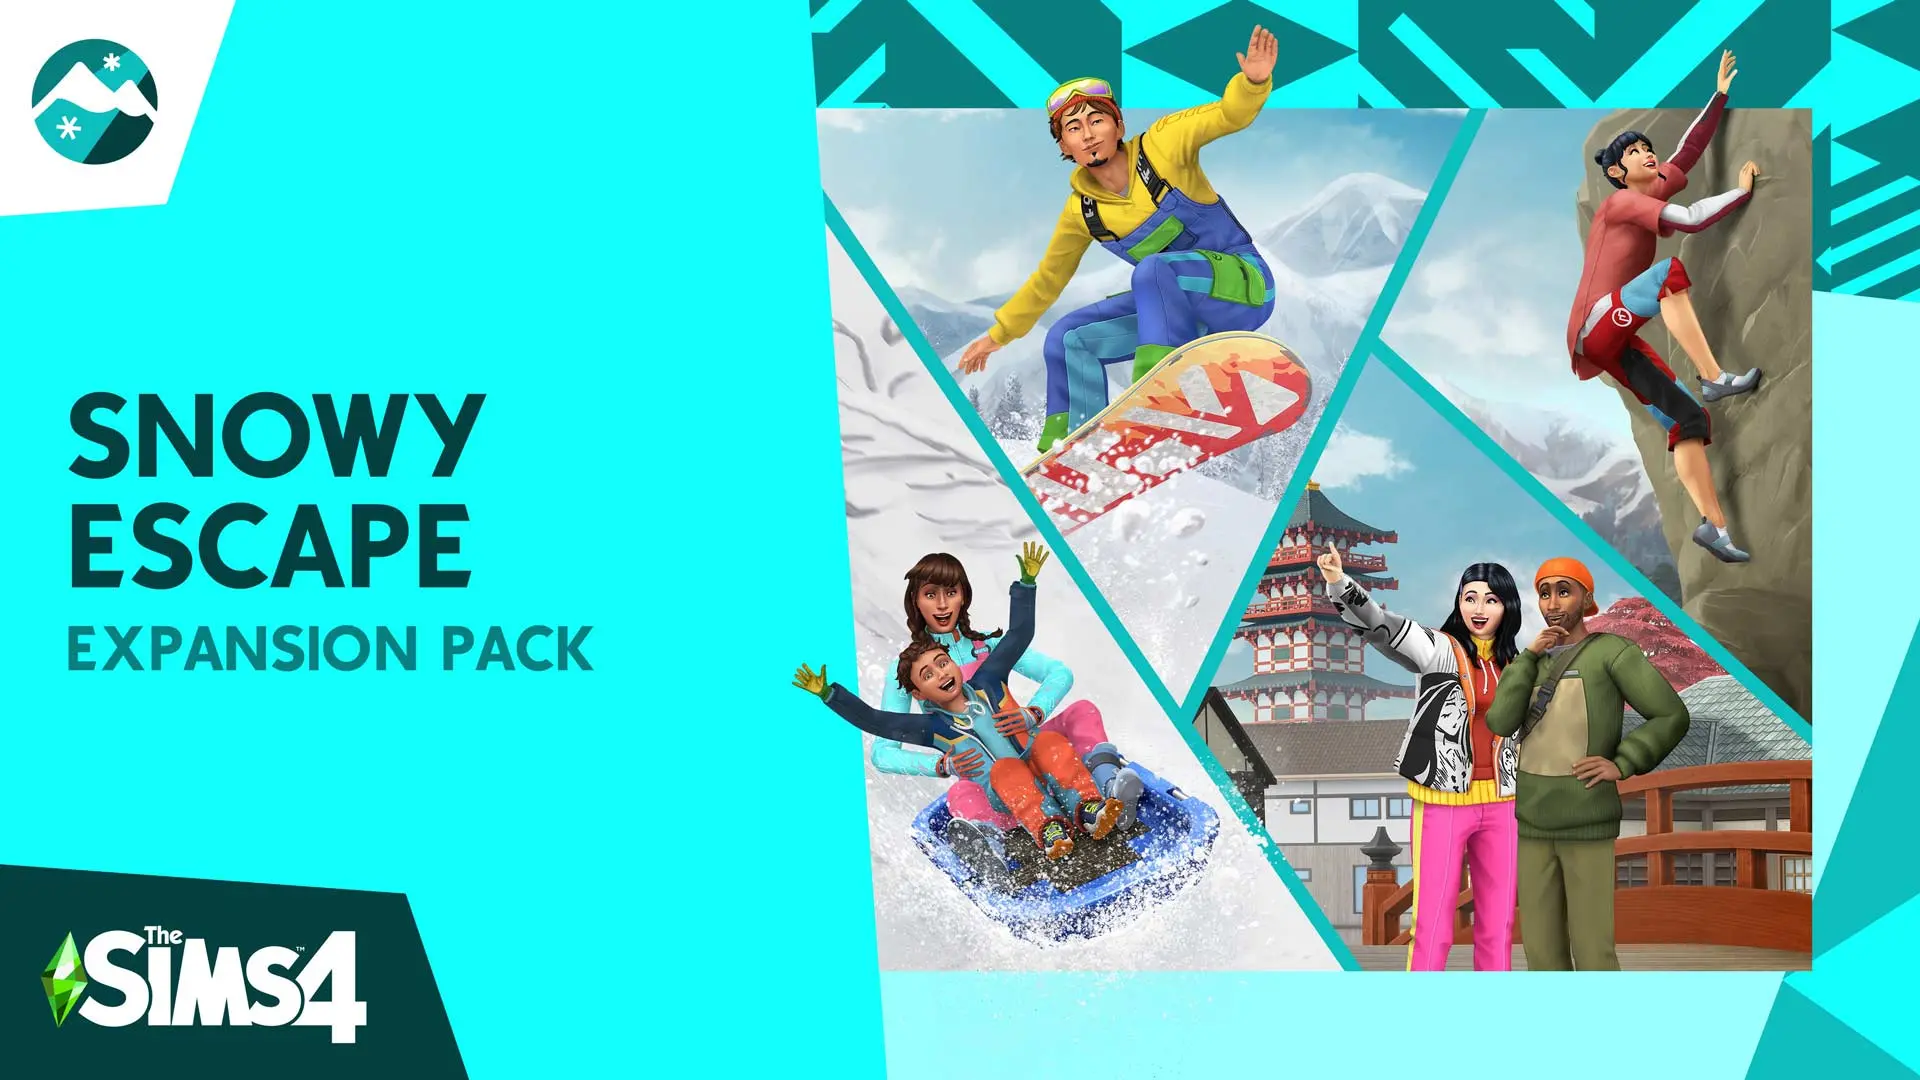 The Sims 4 Snowy Escape expansion pack